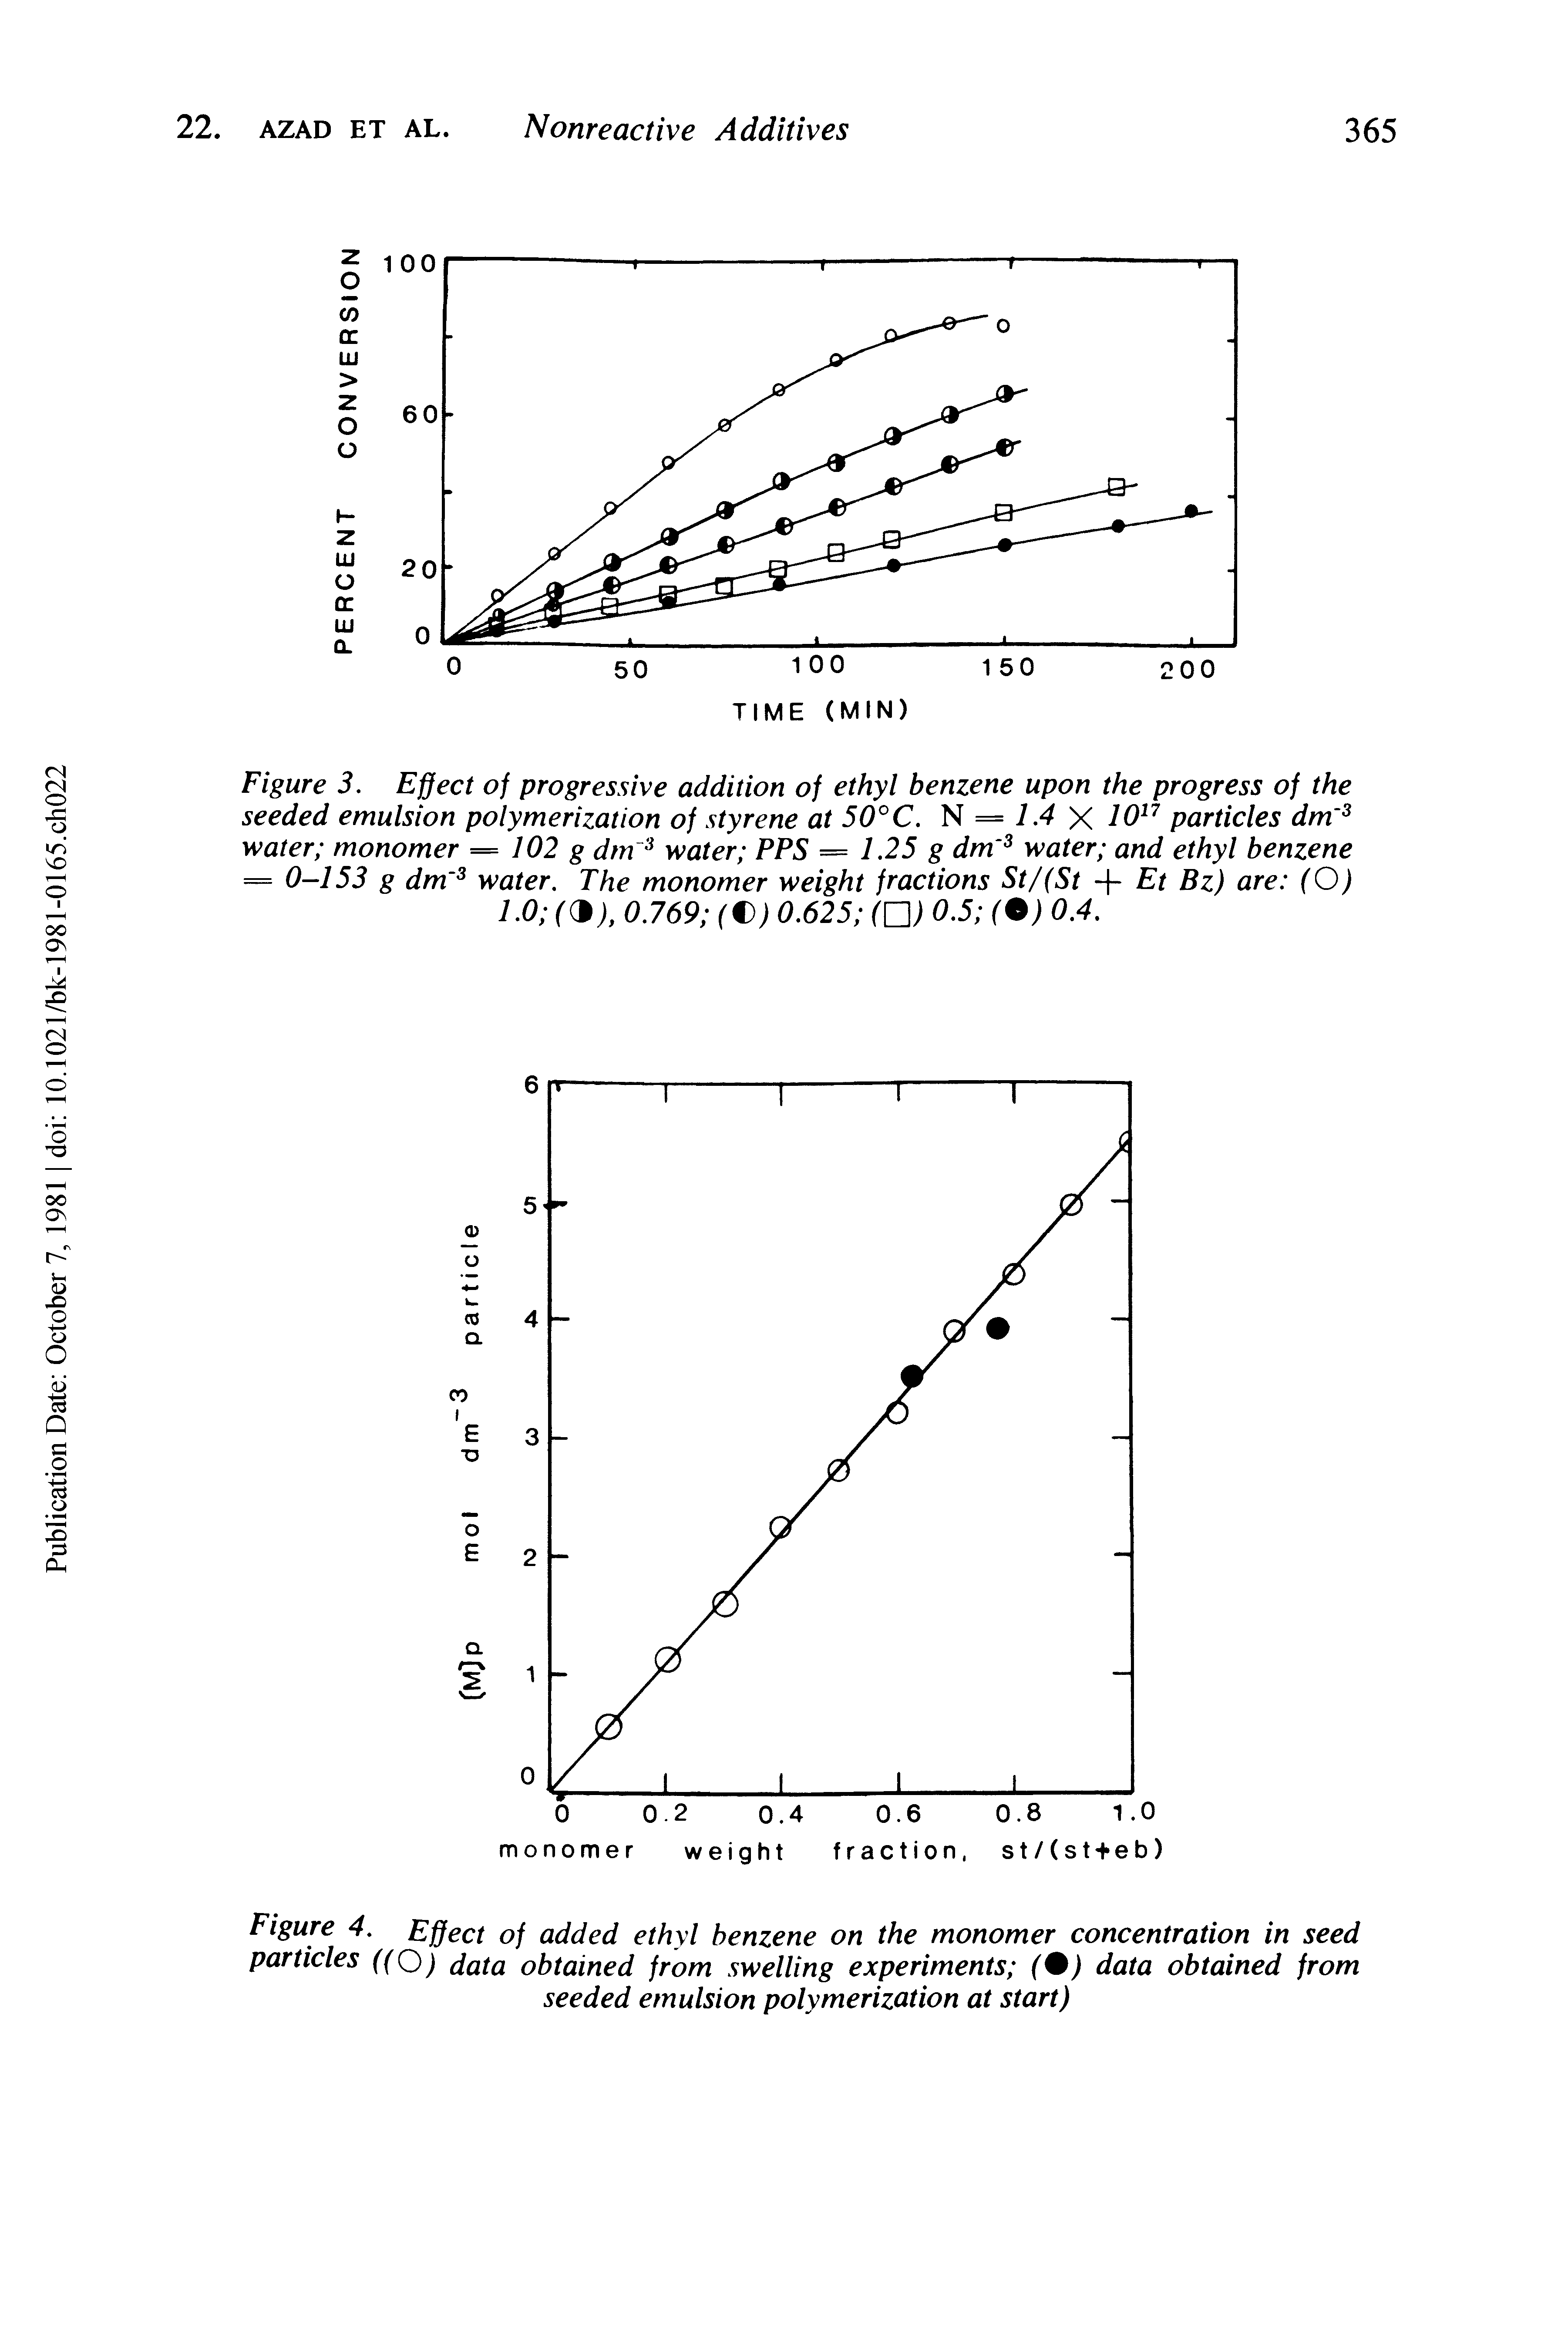 Figure 4. Effect of added ethyl benzene on the monomer concentration in seed particles ((O) data obtained from swelling experiments (%) data obtained from seeded emulsion polymerization at start)...